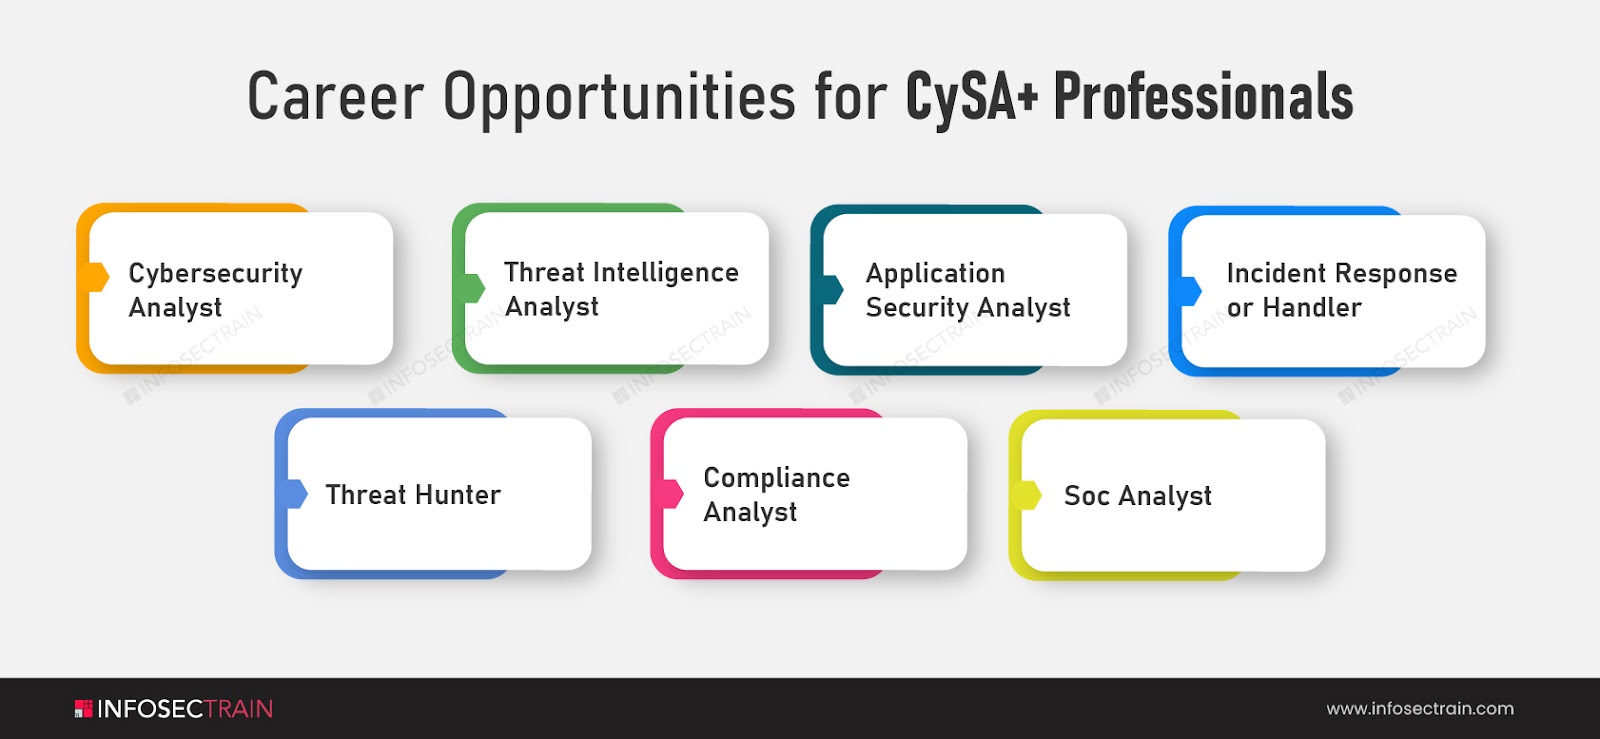 Career Opportunities for CySA+ Professionals